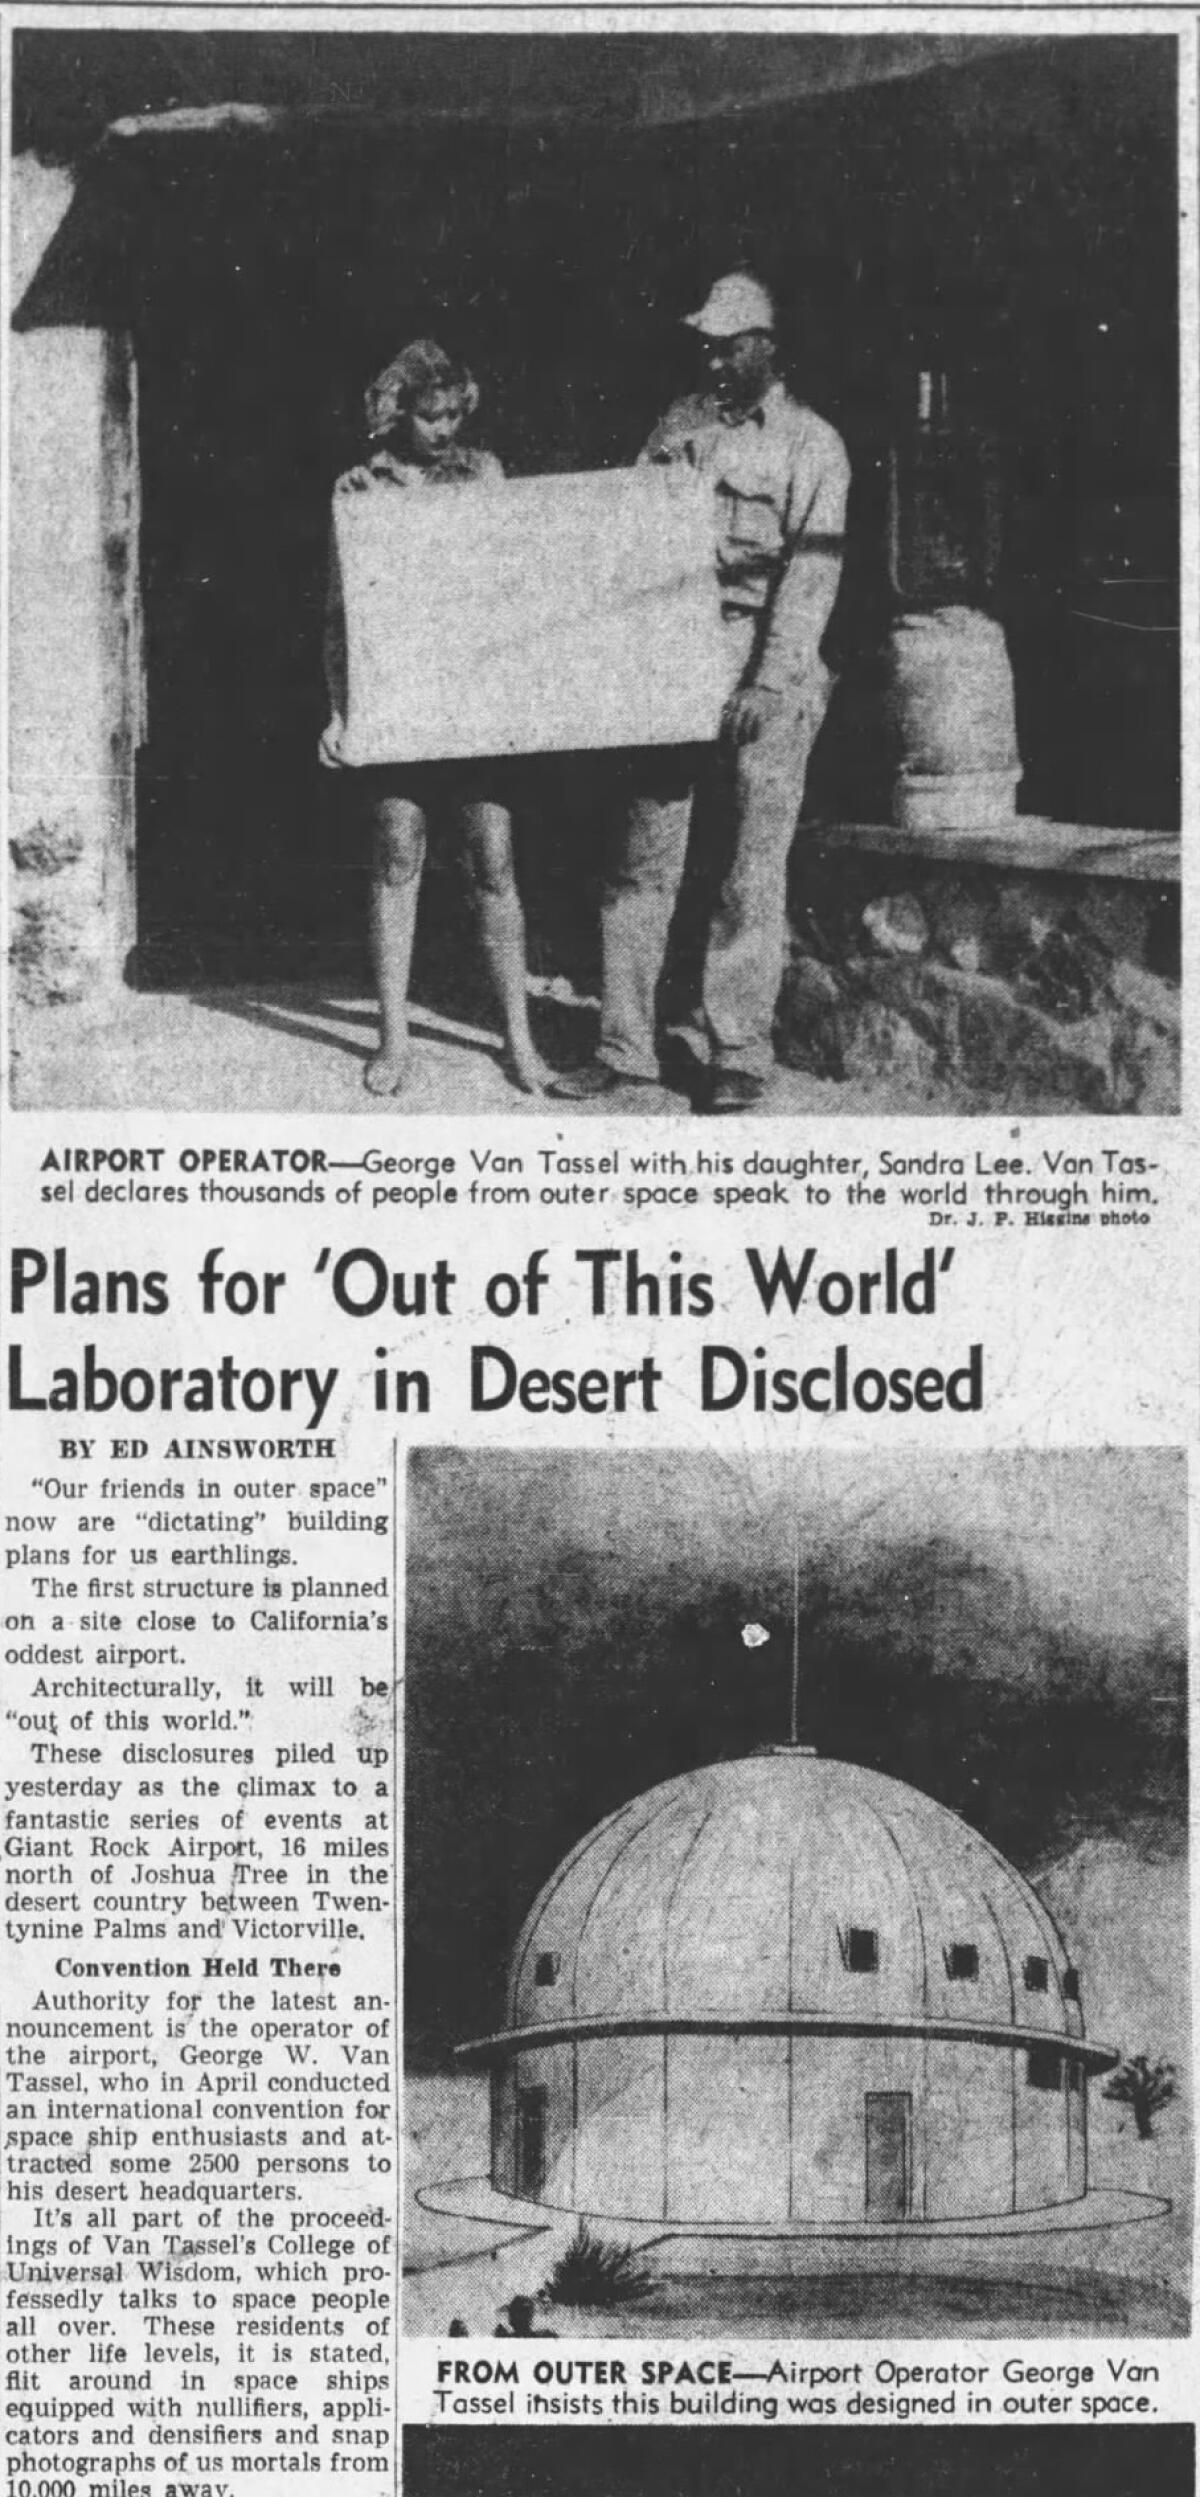 Headline: Plans for 'Out of This World' Laboratory in Desert Disclosed. Photo shows Van Tassel and daughter.